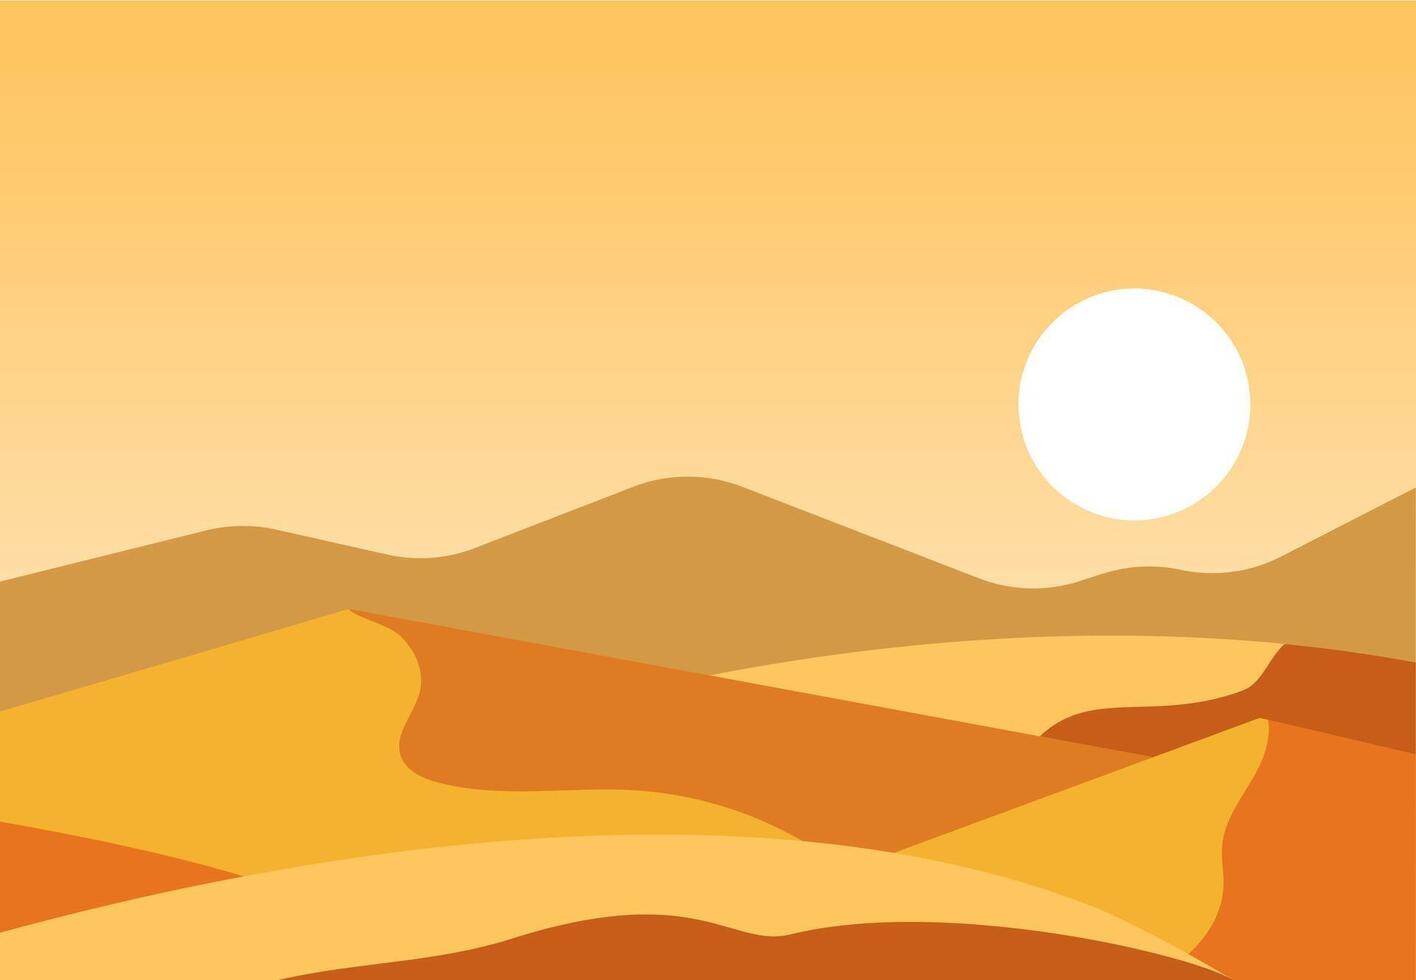 Desert landscape. Minimalistic style. Golden color dunes. Sandy hills and mountains. Round white sun. Modern hot land panorama background. vector